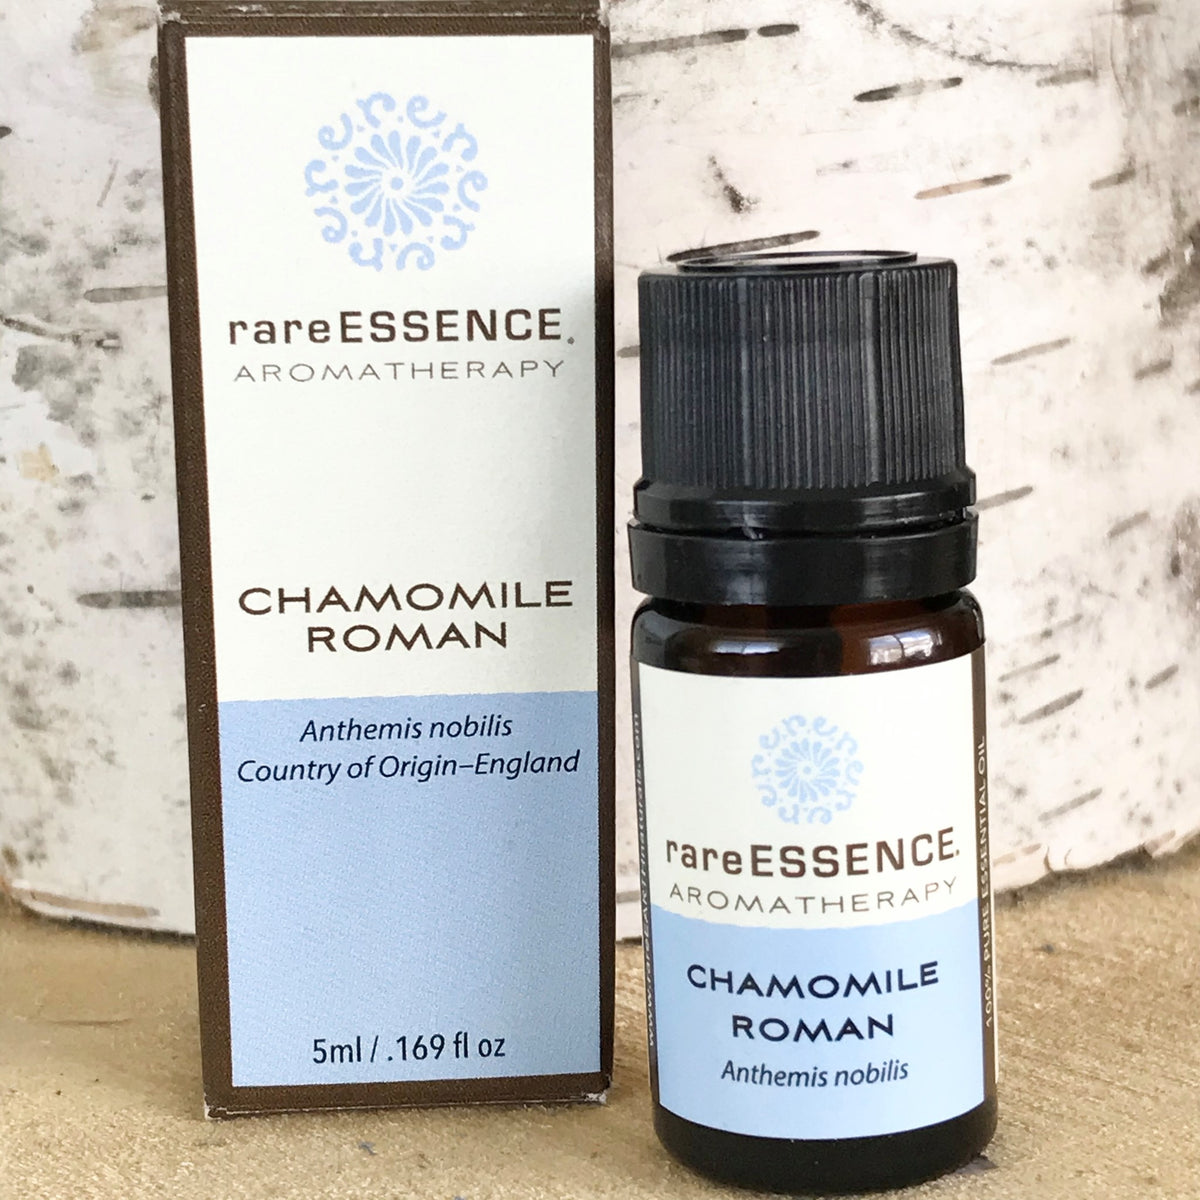 Chamomile Roman essential oil is a very restful, peaceful, and calming oil. Great for inducing a restful sleep.